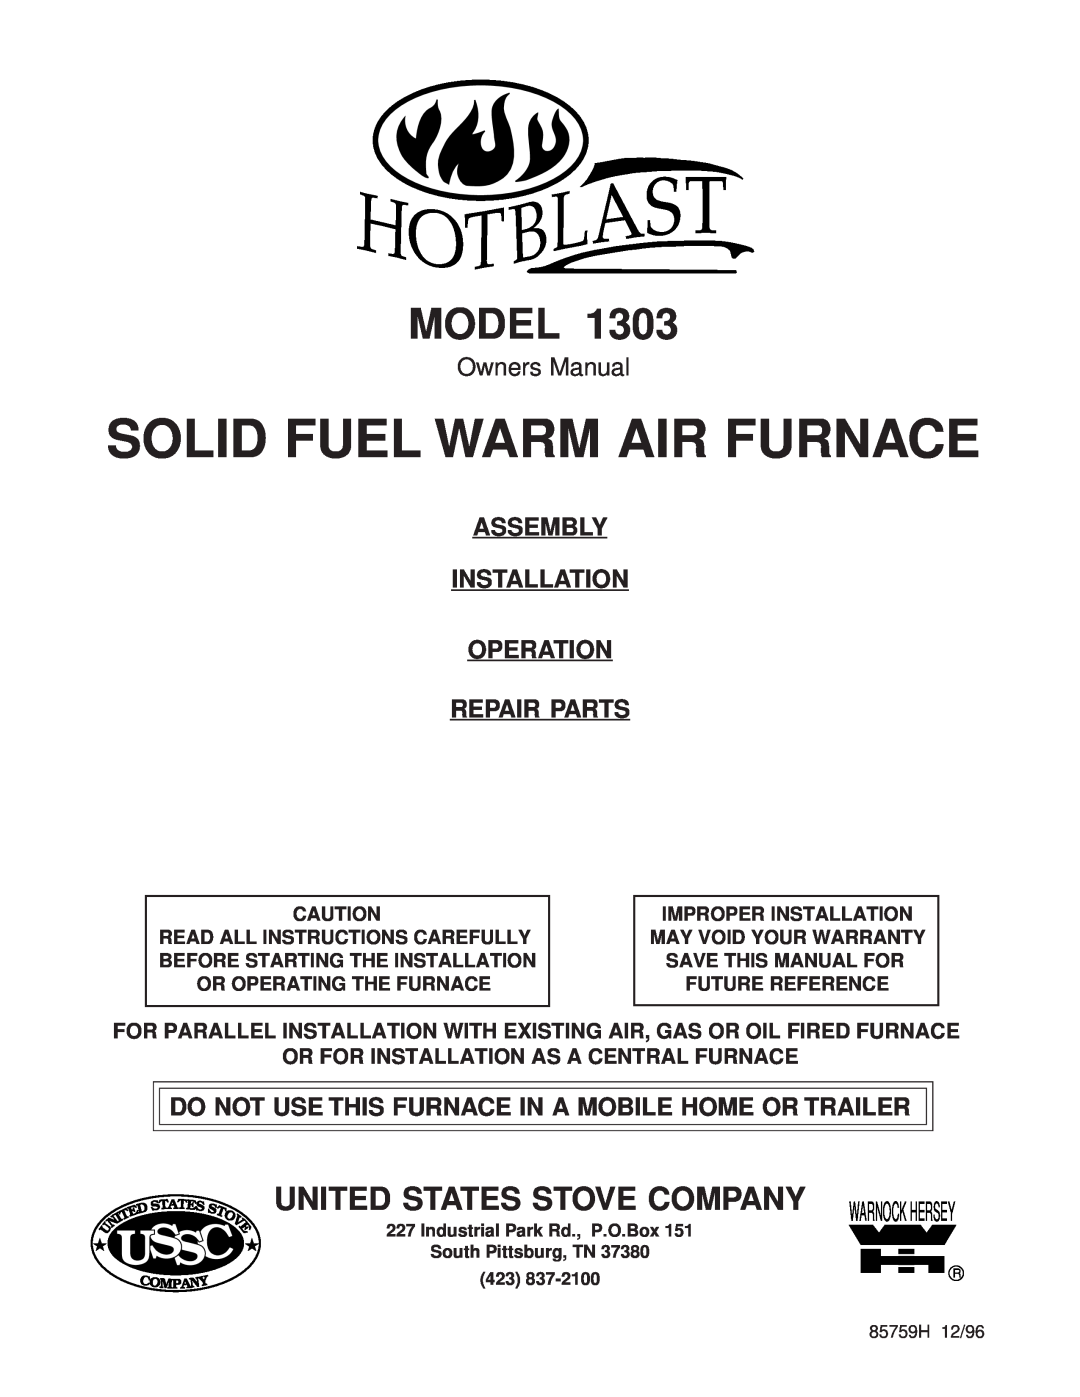 United States Stove AIR warranty Solid Fuel Warm Air Furnace, Ussc, Model, Assembly Installation Operation Repair Parts 